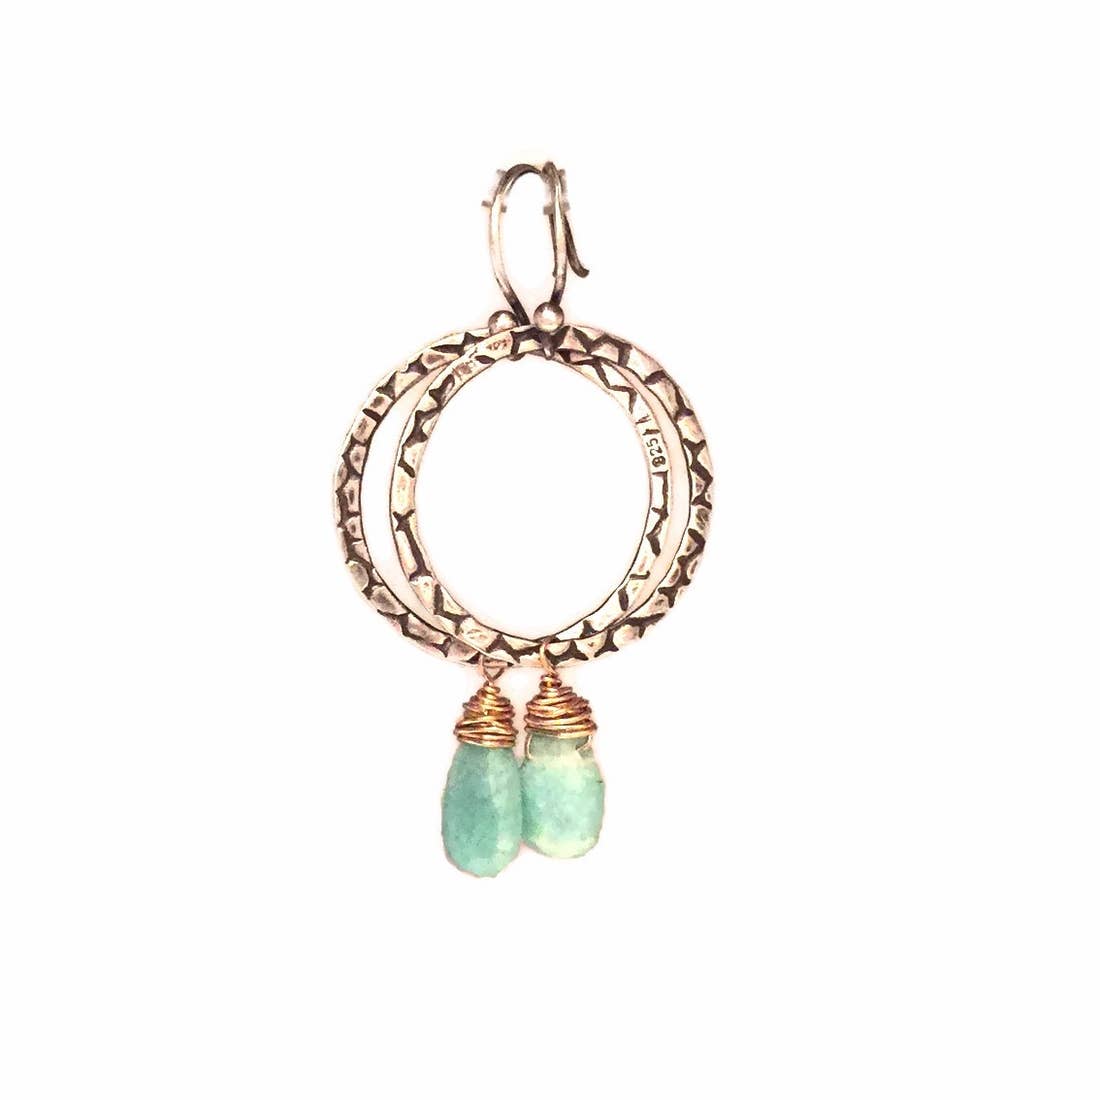 Textured Loop with Gold Fill and Semi-Precious Gemstone Earrings